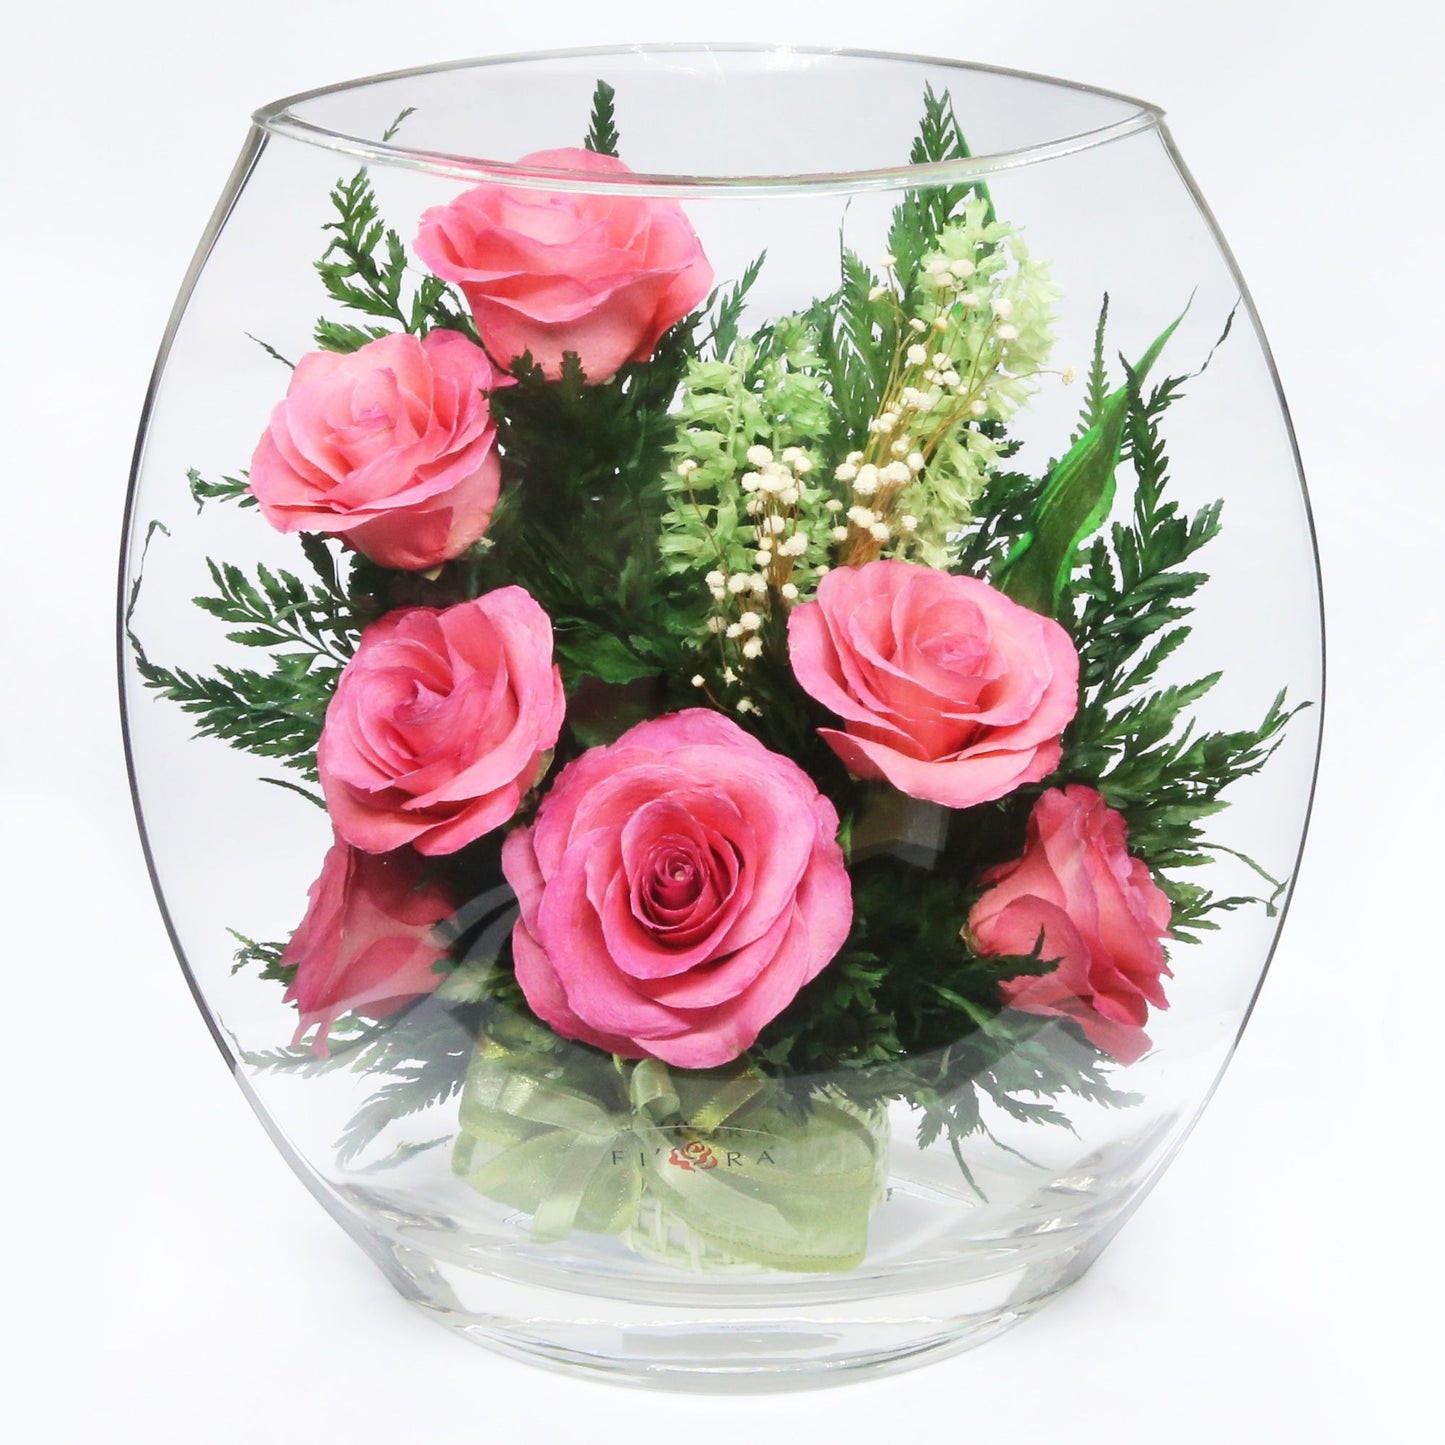 40339 Long-Lasting Pink Roses in a Sealed Glass Vase - FIORA FLOWER